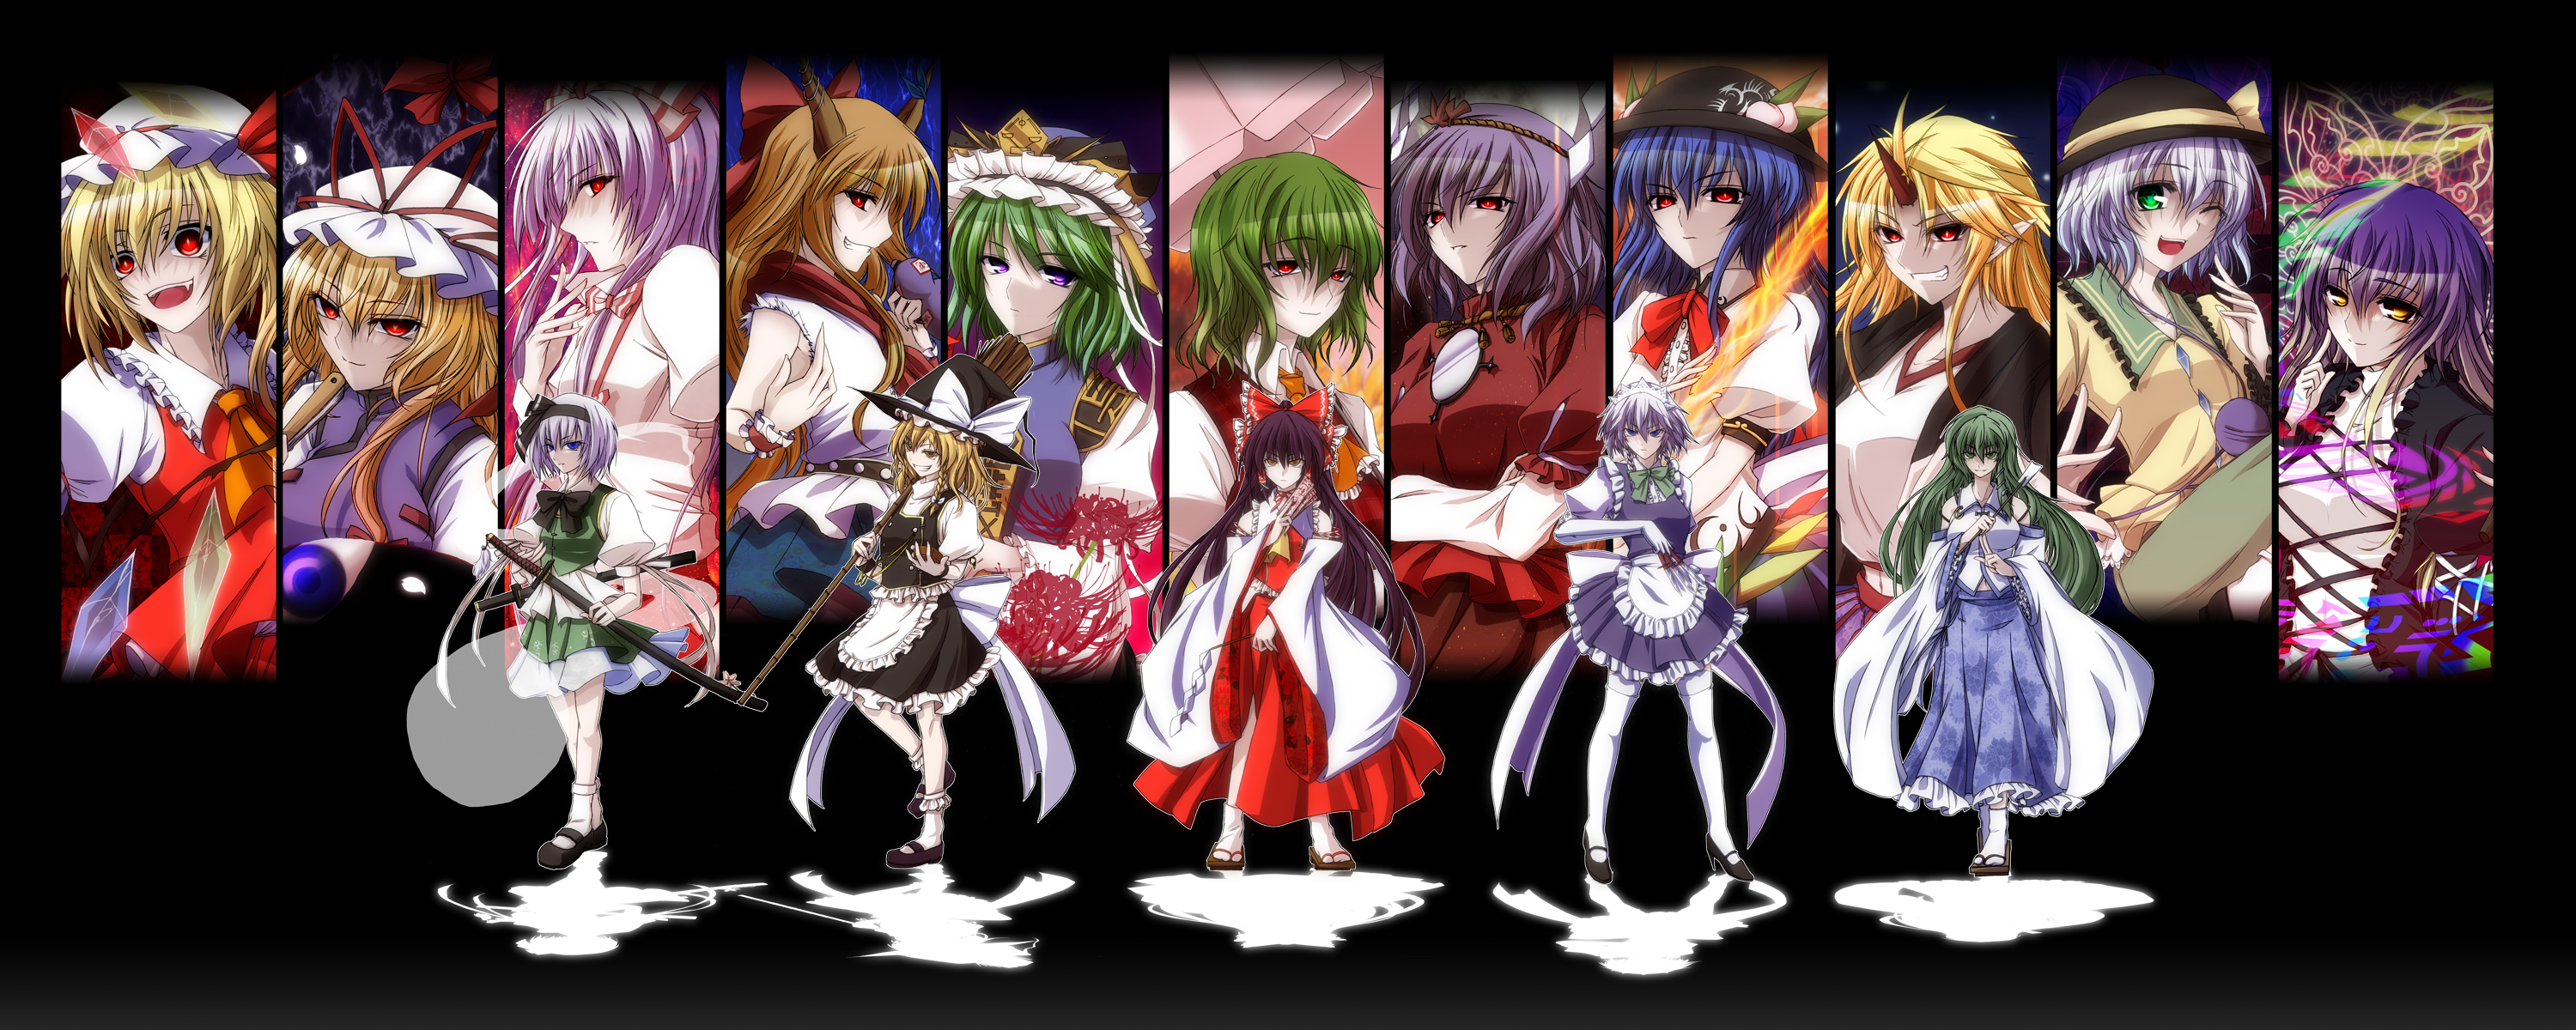 Touhou Complete Fanmade & Anime - Game Media - LaunchBox Community Forums-demhanvico.com.vn